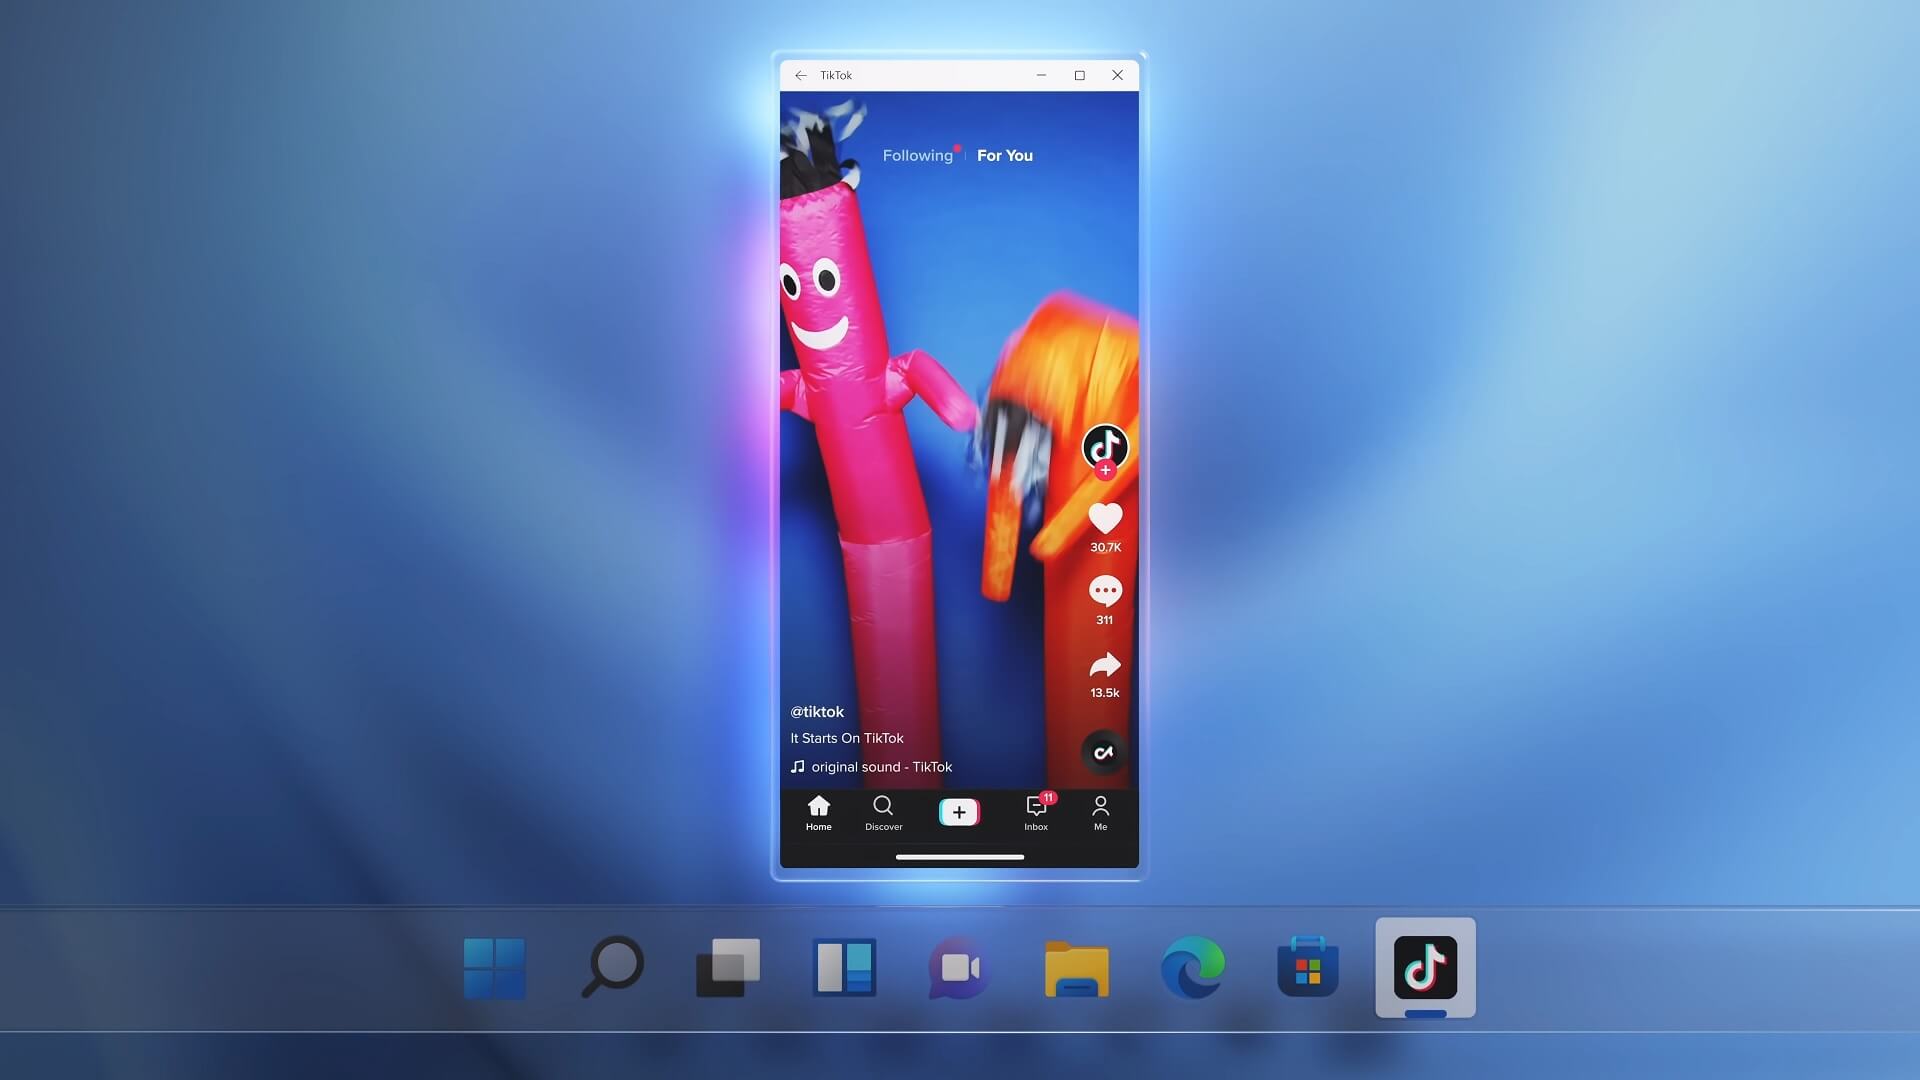 android apps windows 11